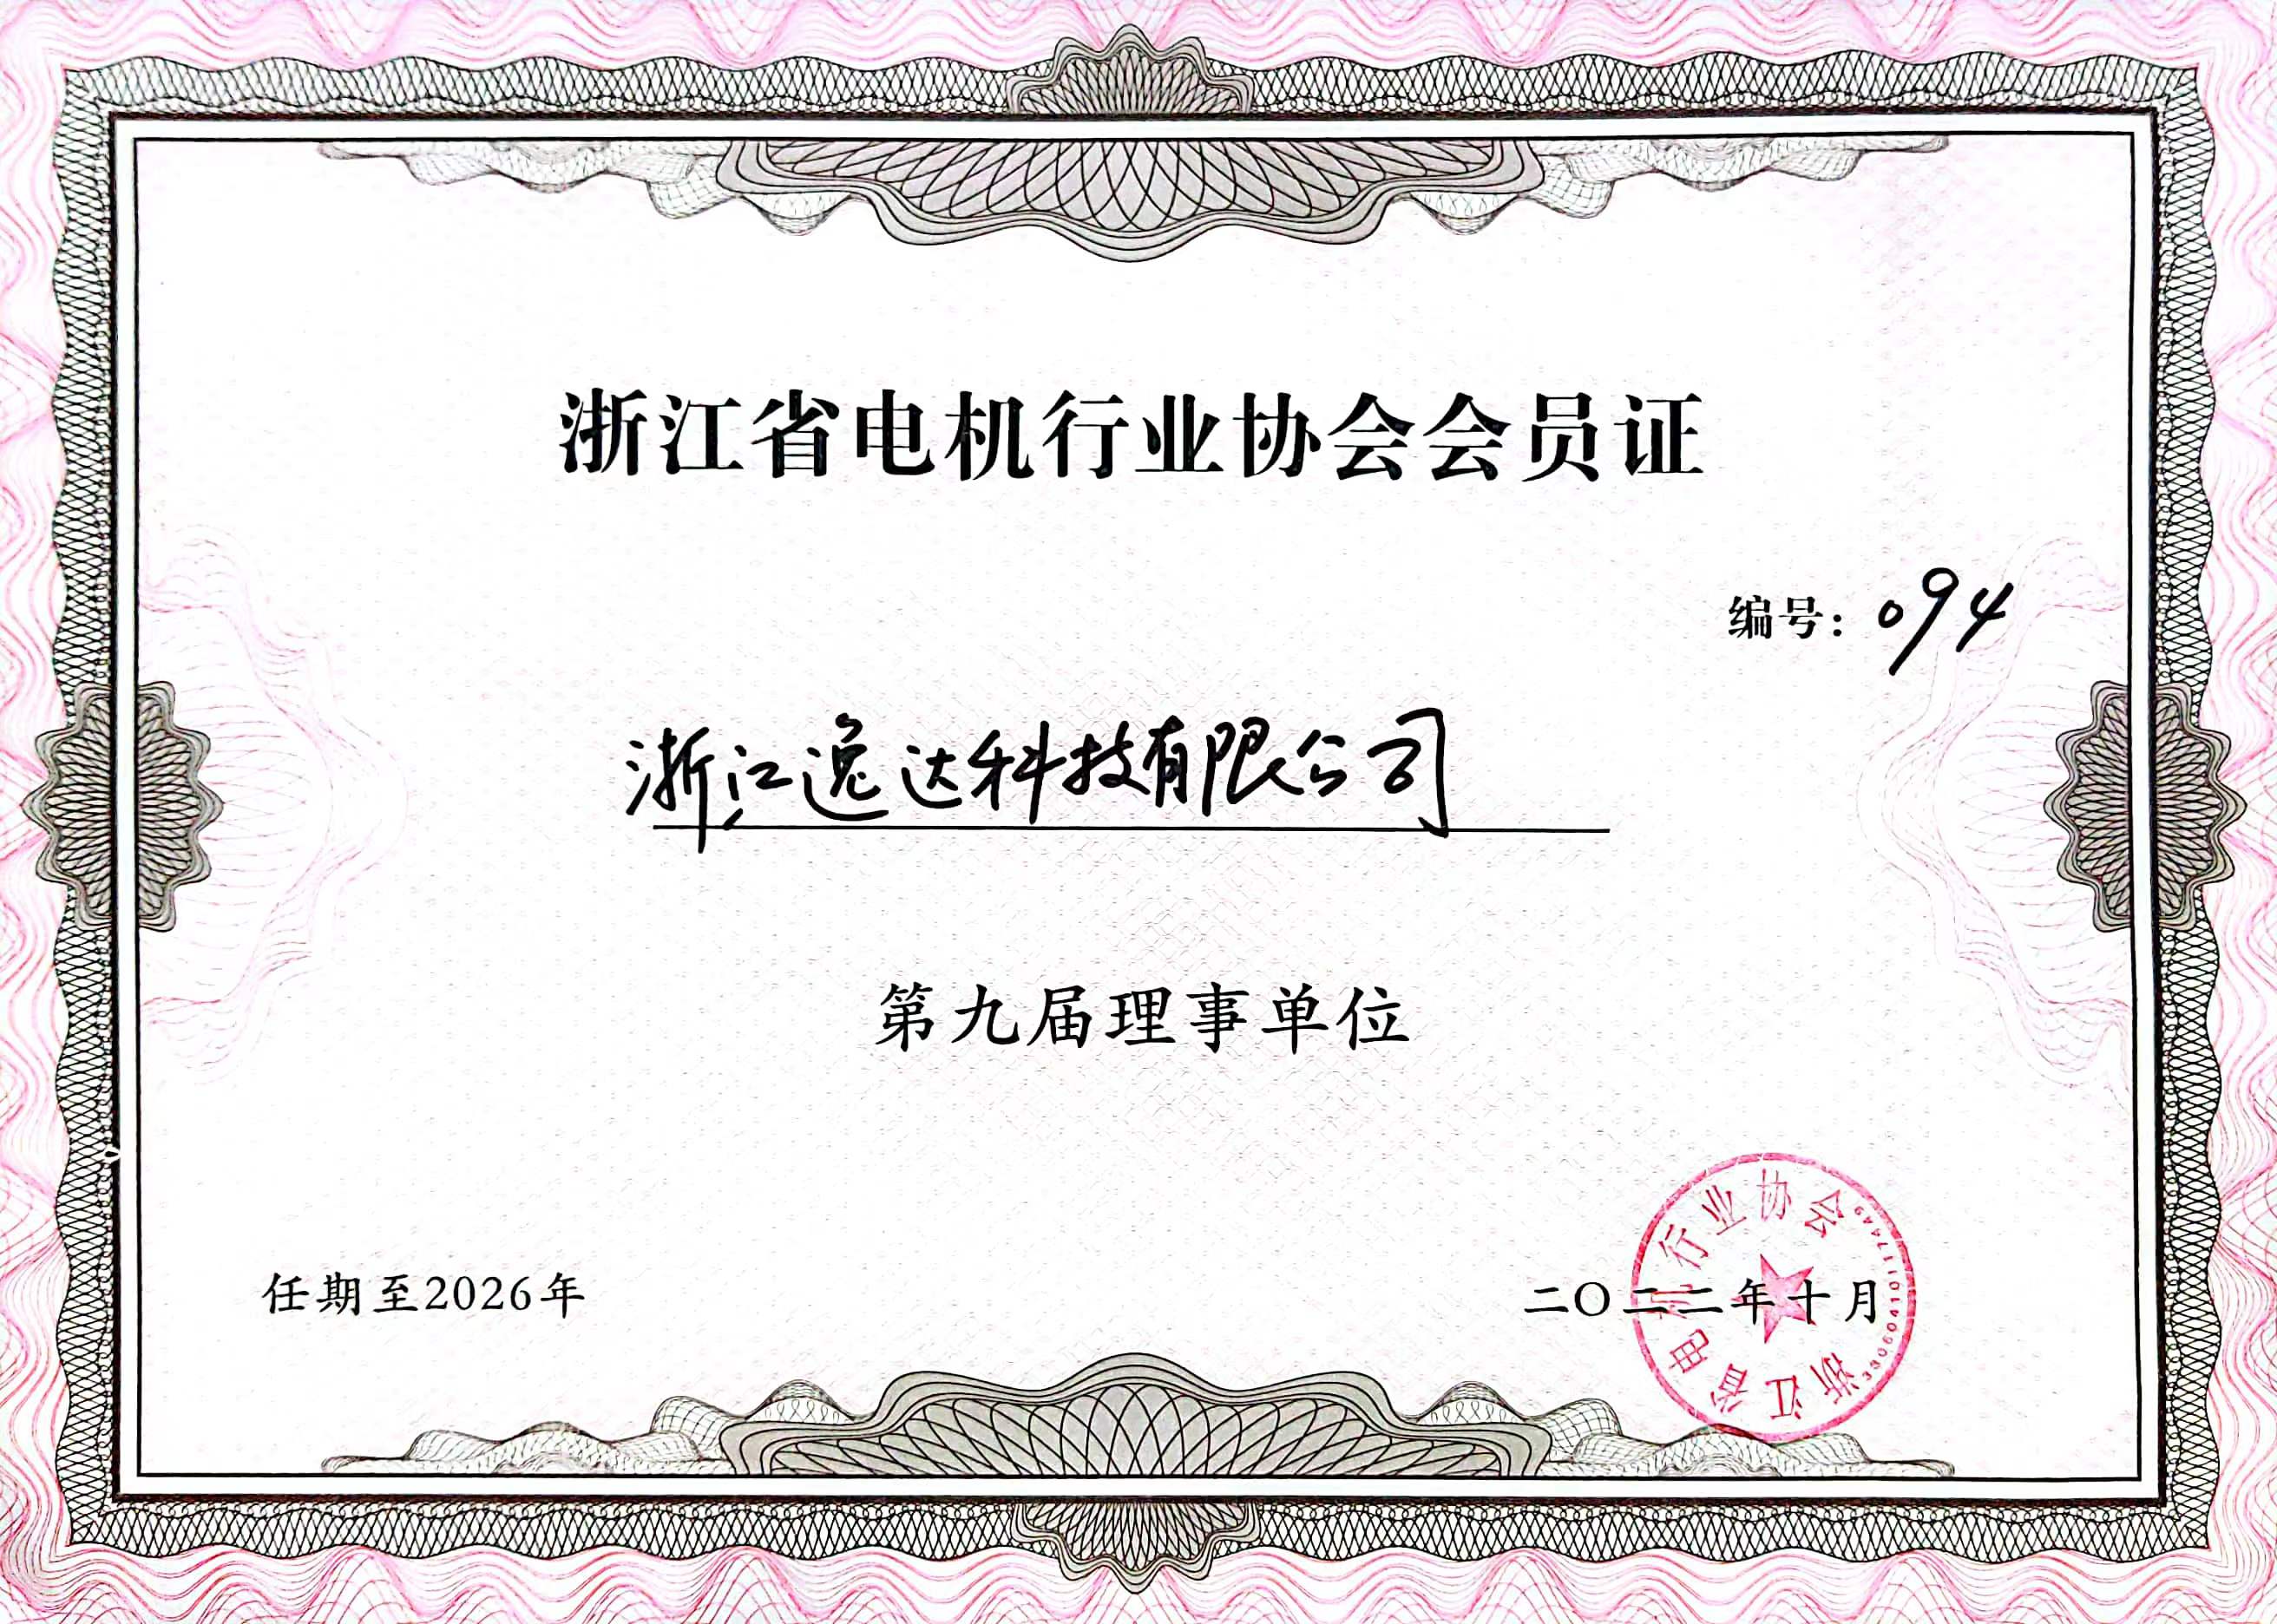 Good news! Yida Technology has become a member of the Zhejiang Electric Machinery Industry Association!